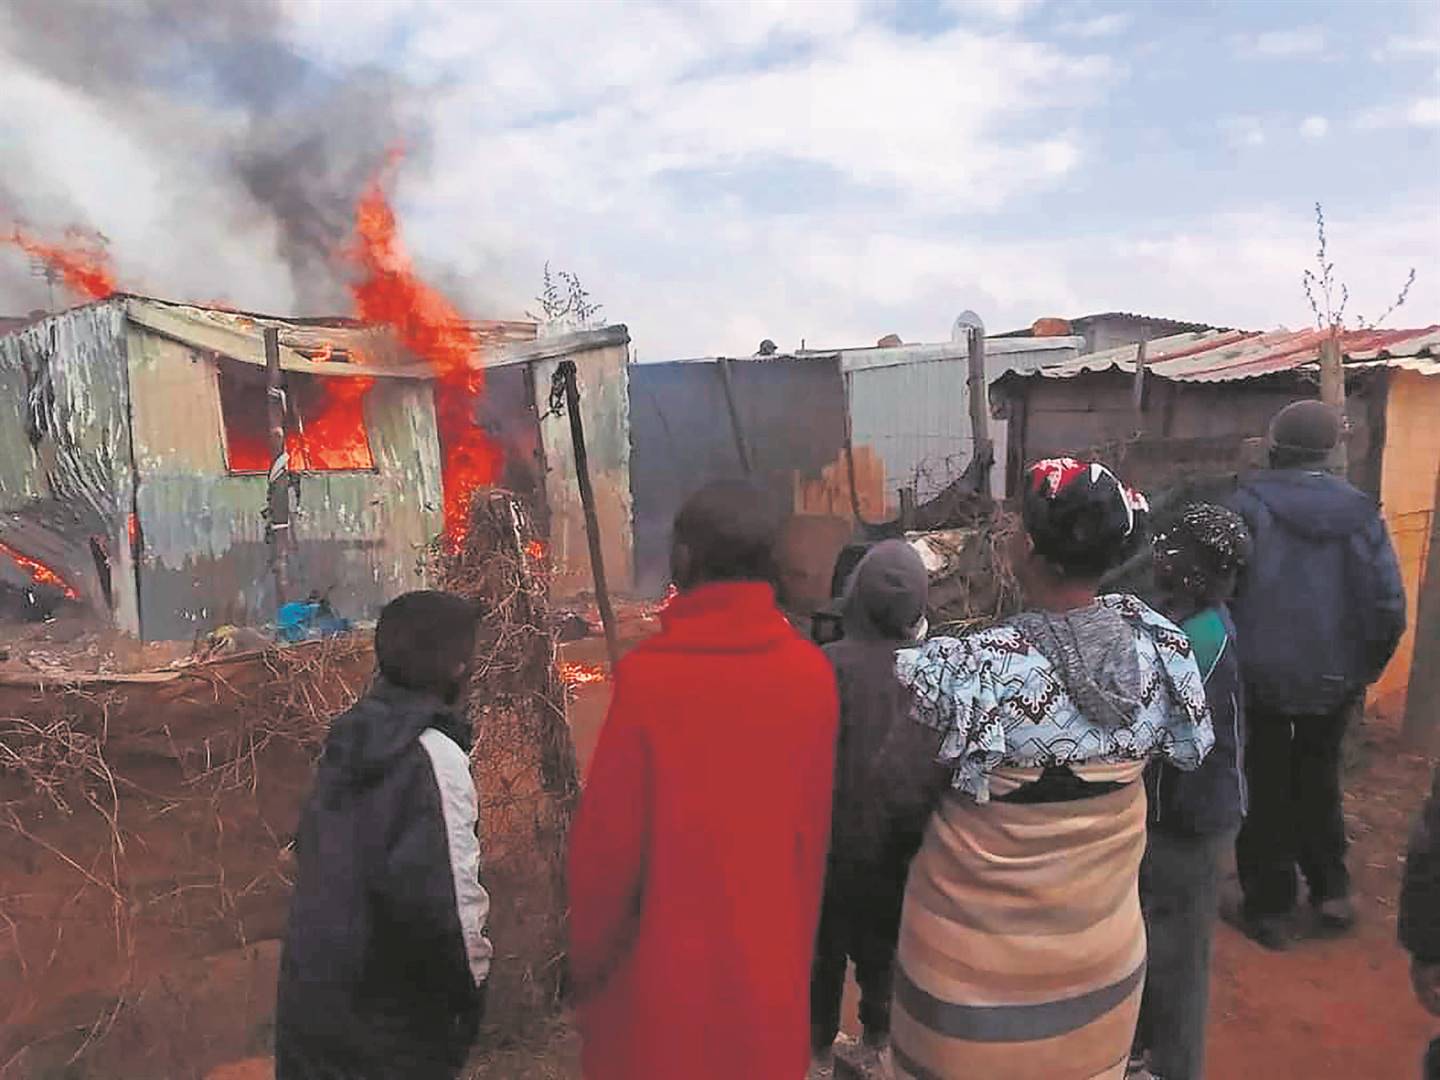 Residents of Daveyton, in Ekurhuleni, set alight an alleged rapist’s shack and vowed to bring him to justice.